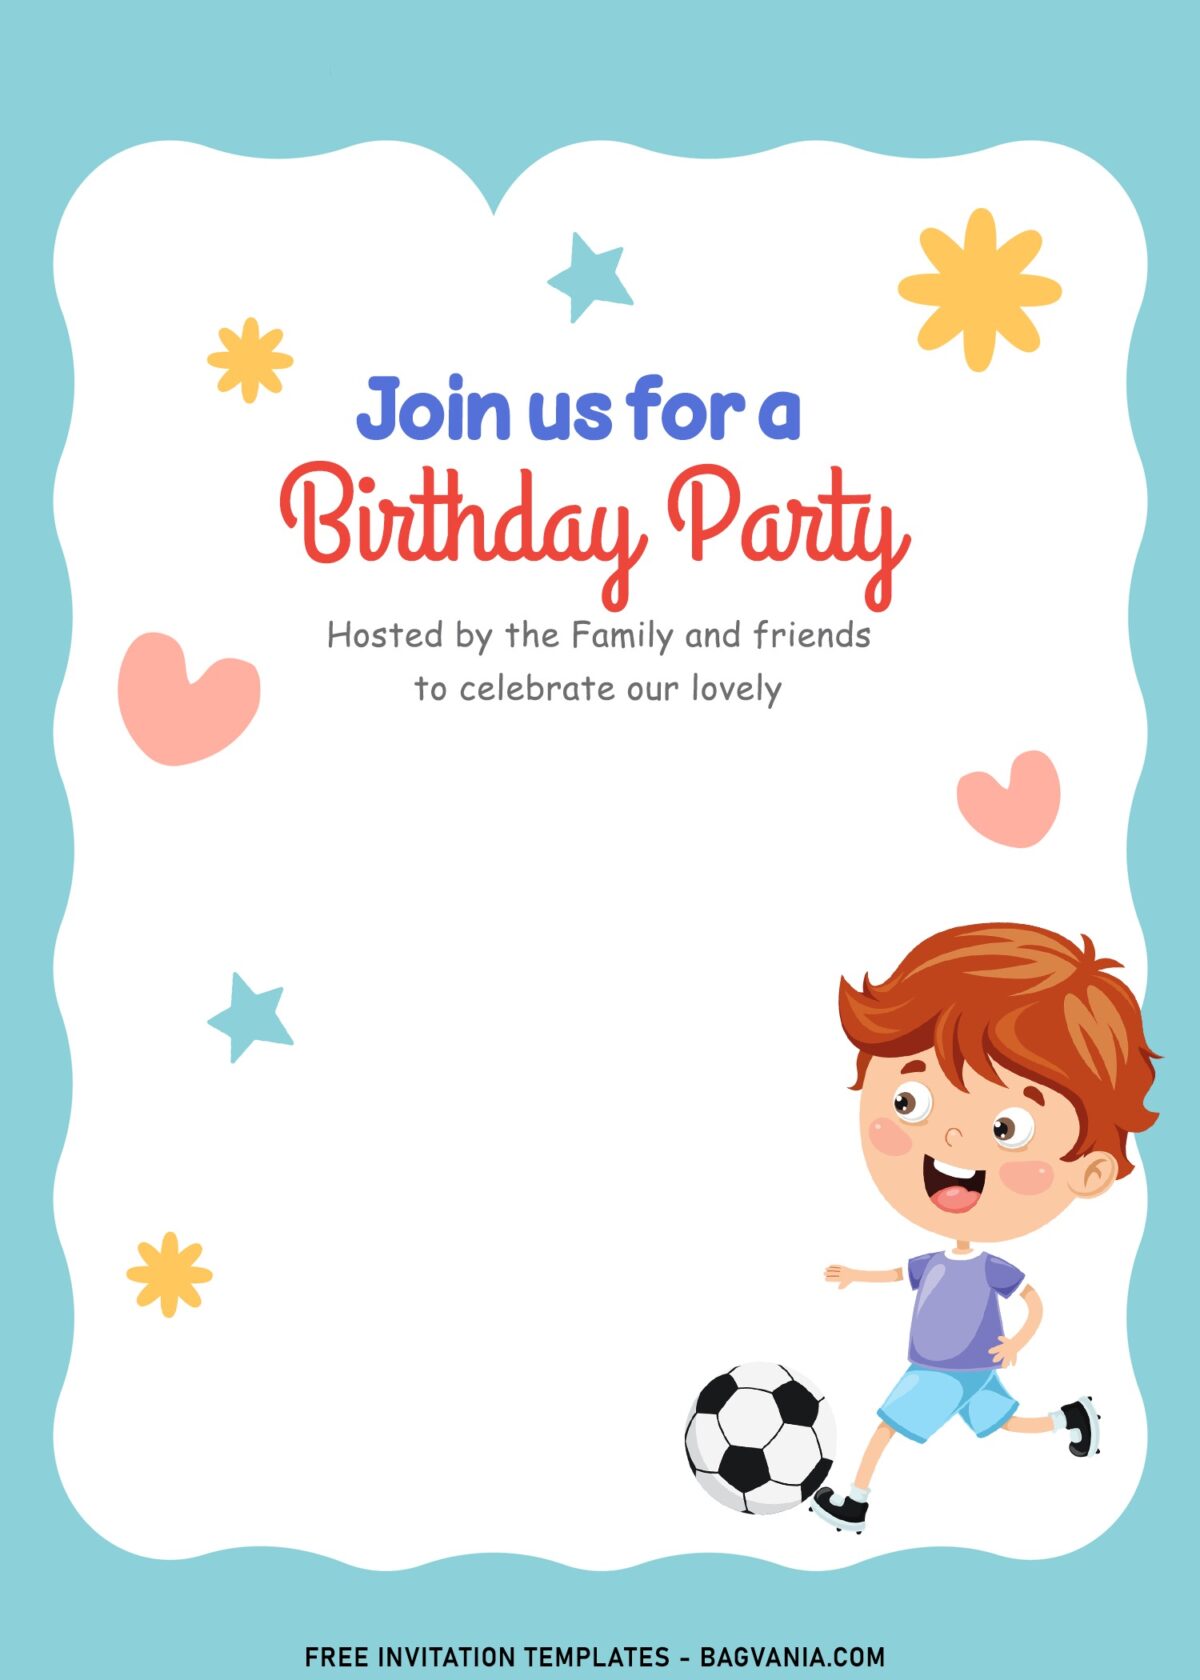 9+ Playful And Adorable Kids Birthday Invitation Templates For All Ages with adorable little boy playing soccer football